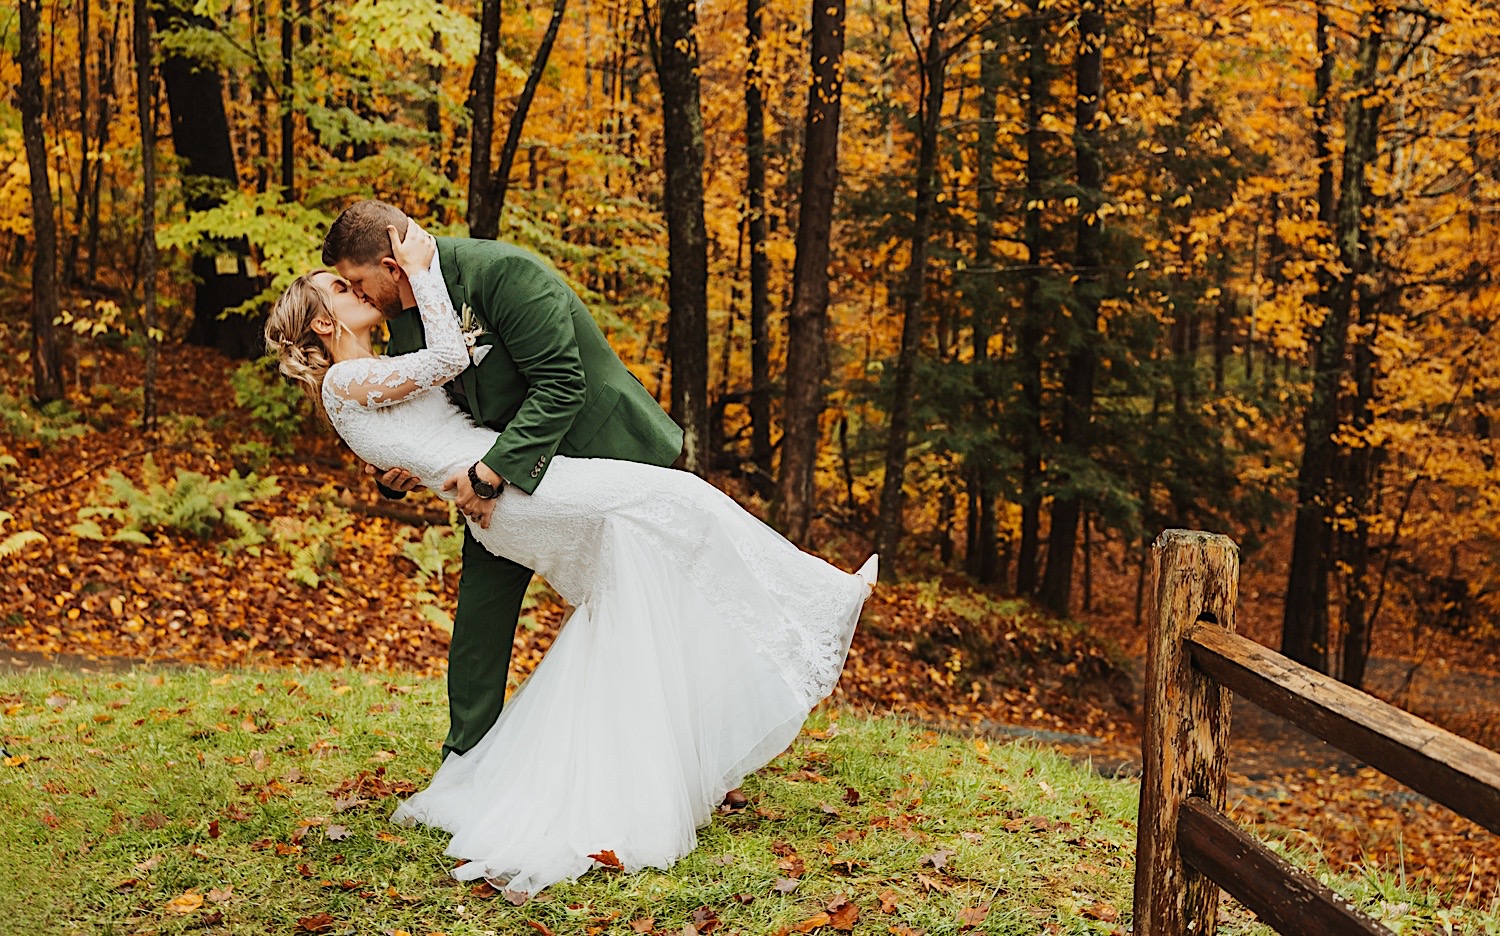 A bride and groom kiss one another while in the grass next to a forest of yellow trees in the fall